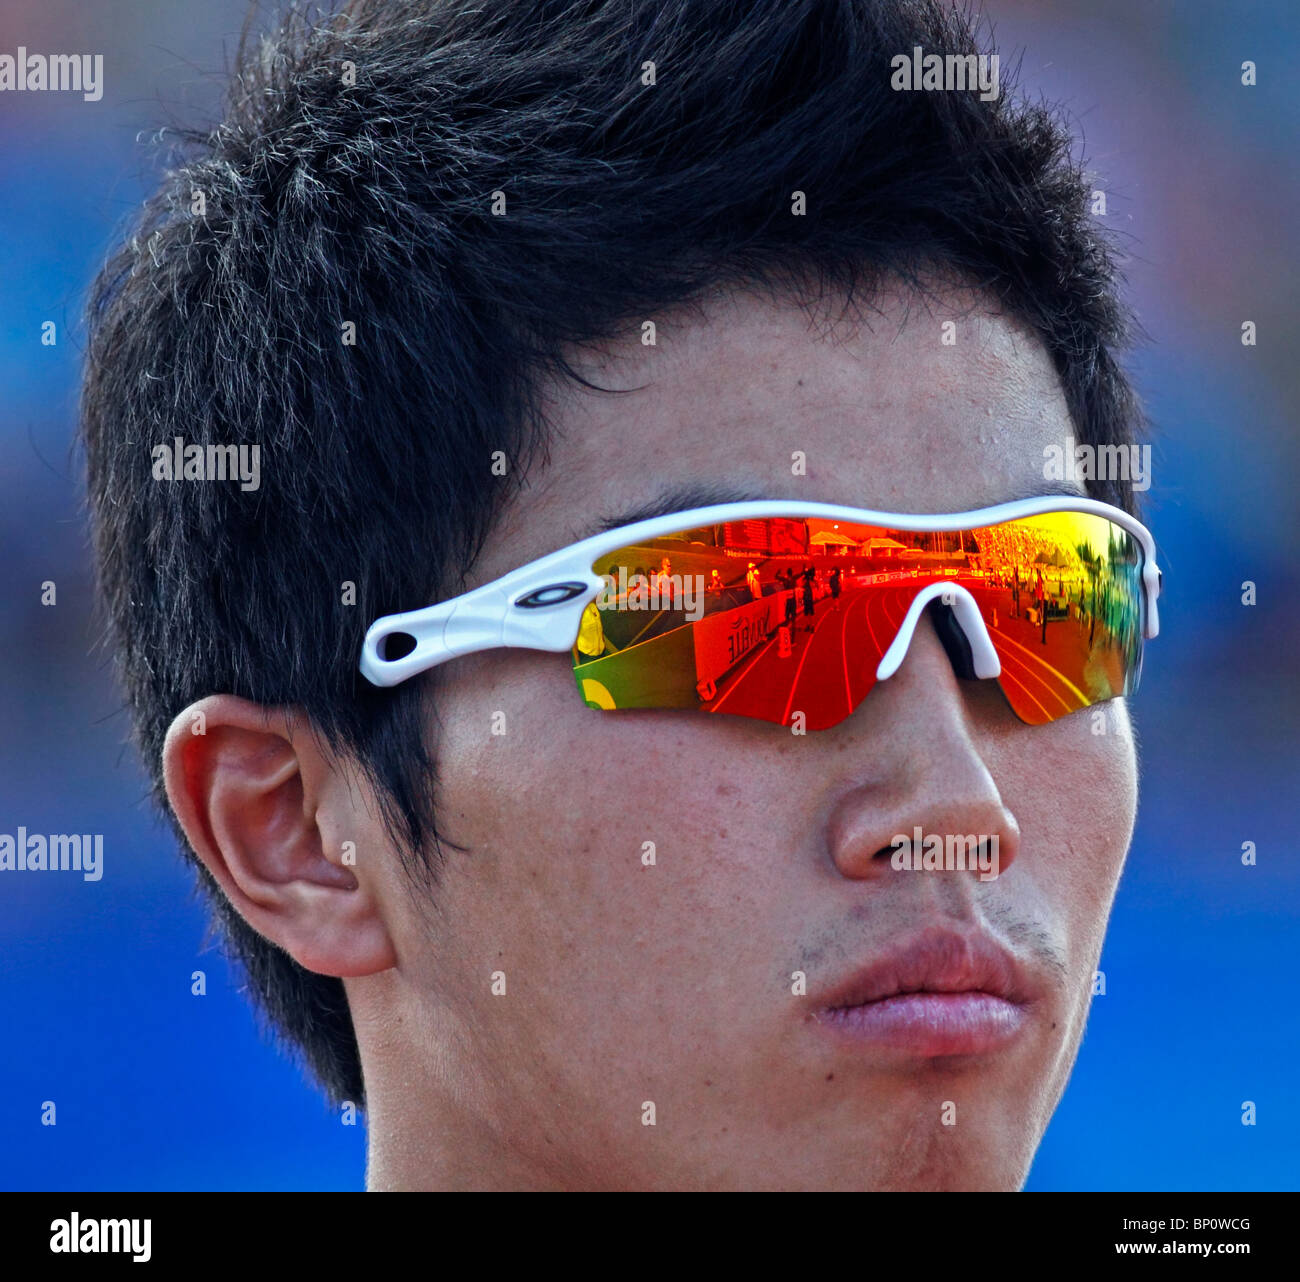 Sunglasses reflection of 400 metres competitor Bonggo Park of Korea at the 2010 IAAF World Junior Championships in Moncton. Stock Photo